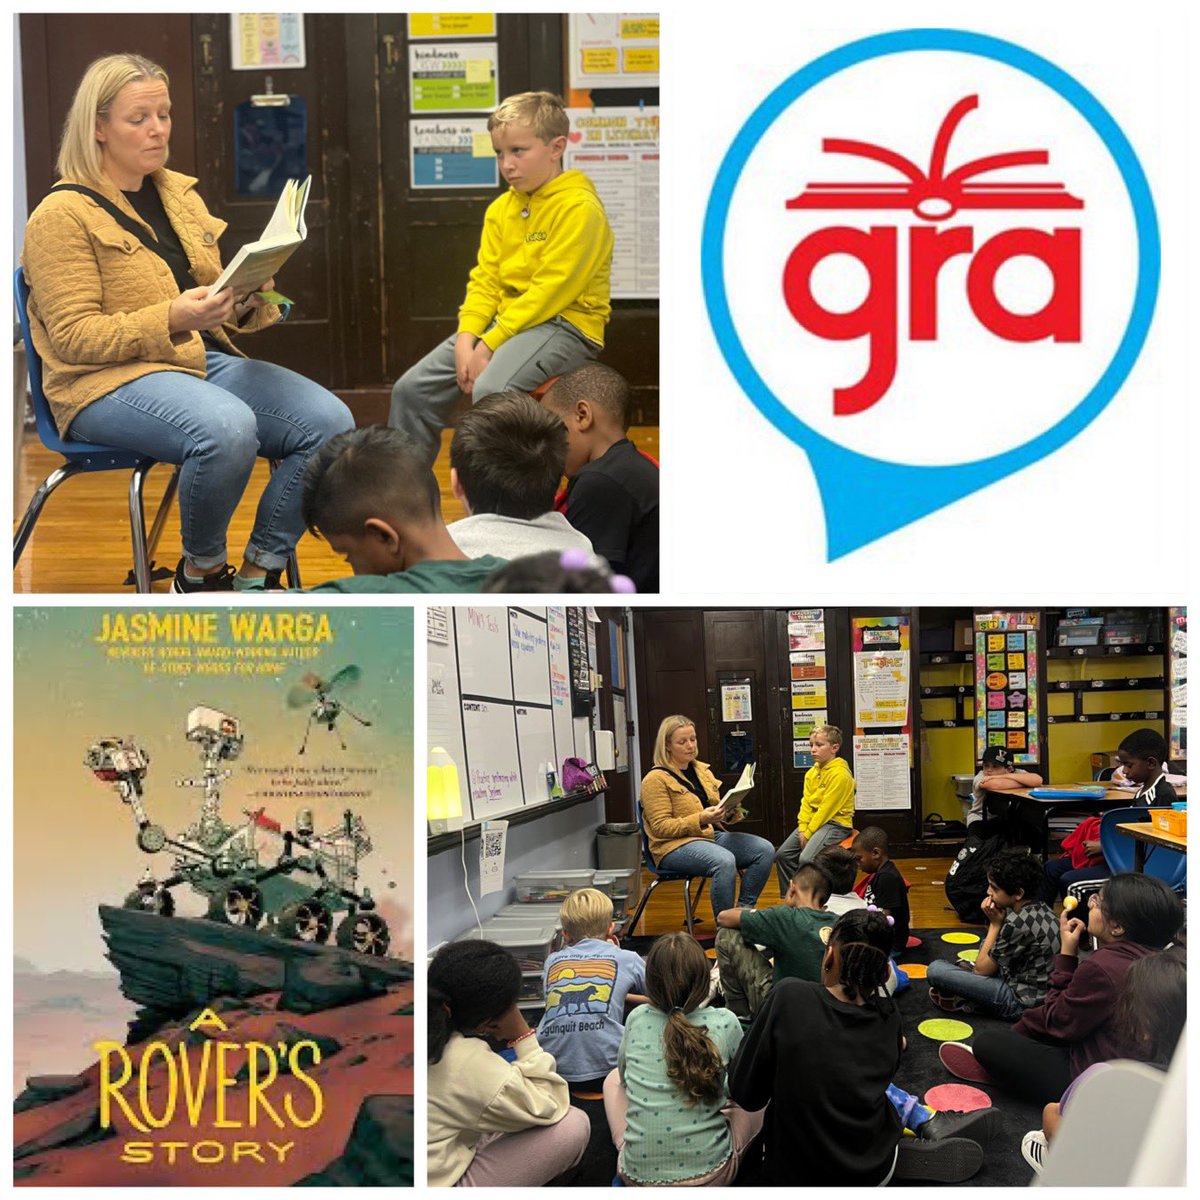 Thank you Mrs. Connor and Mrs. VanDeVen for coming to read some of this year’s Global Read Aloud to our class! We loved having you visit our classroom! #globalreadaloud #excellenceonpurpose #gomules